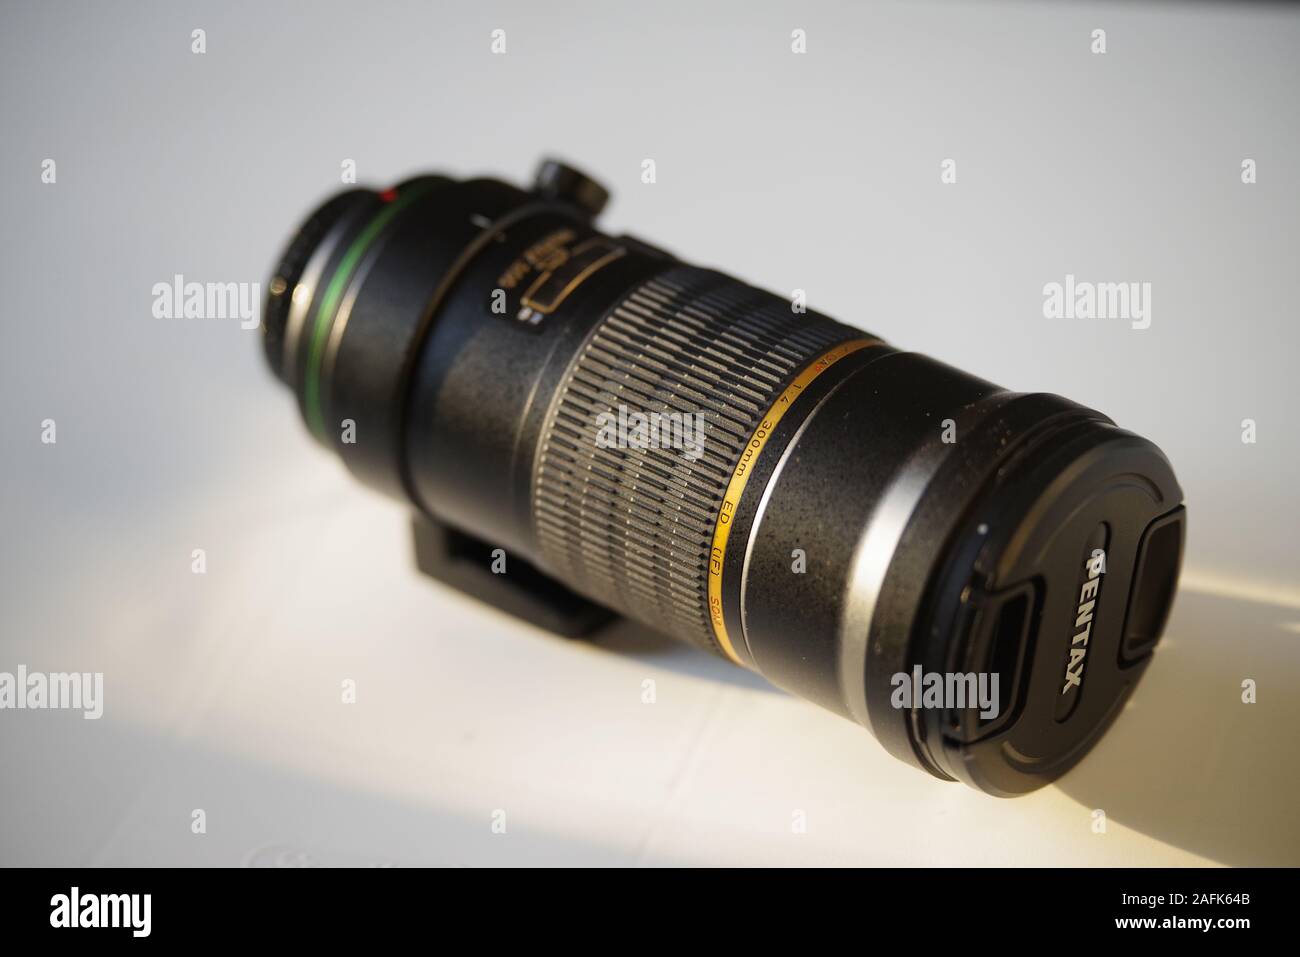 The SMC Pentax-DA* 300mm F4 lens, without a hood attached Stock Photo -  Alamy